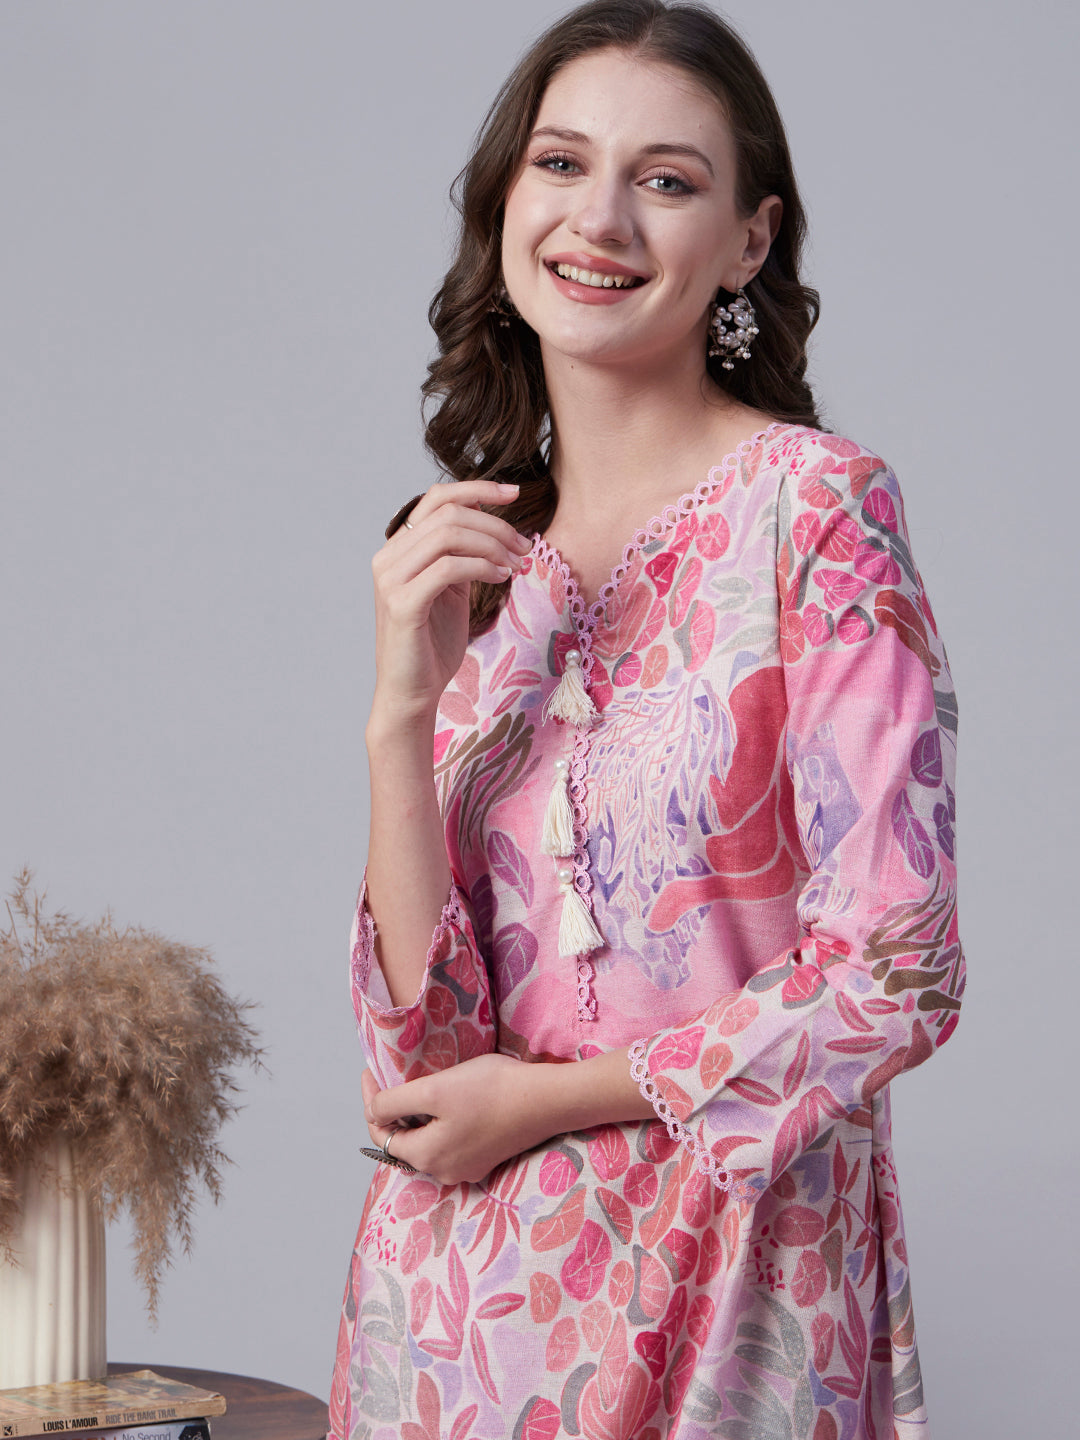 Abstract Printed Pearl, Fringed Tassels & Crochet Lace Embellished Kurta with Harem Pants - Pink & Multi